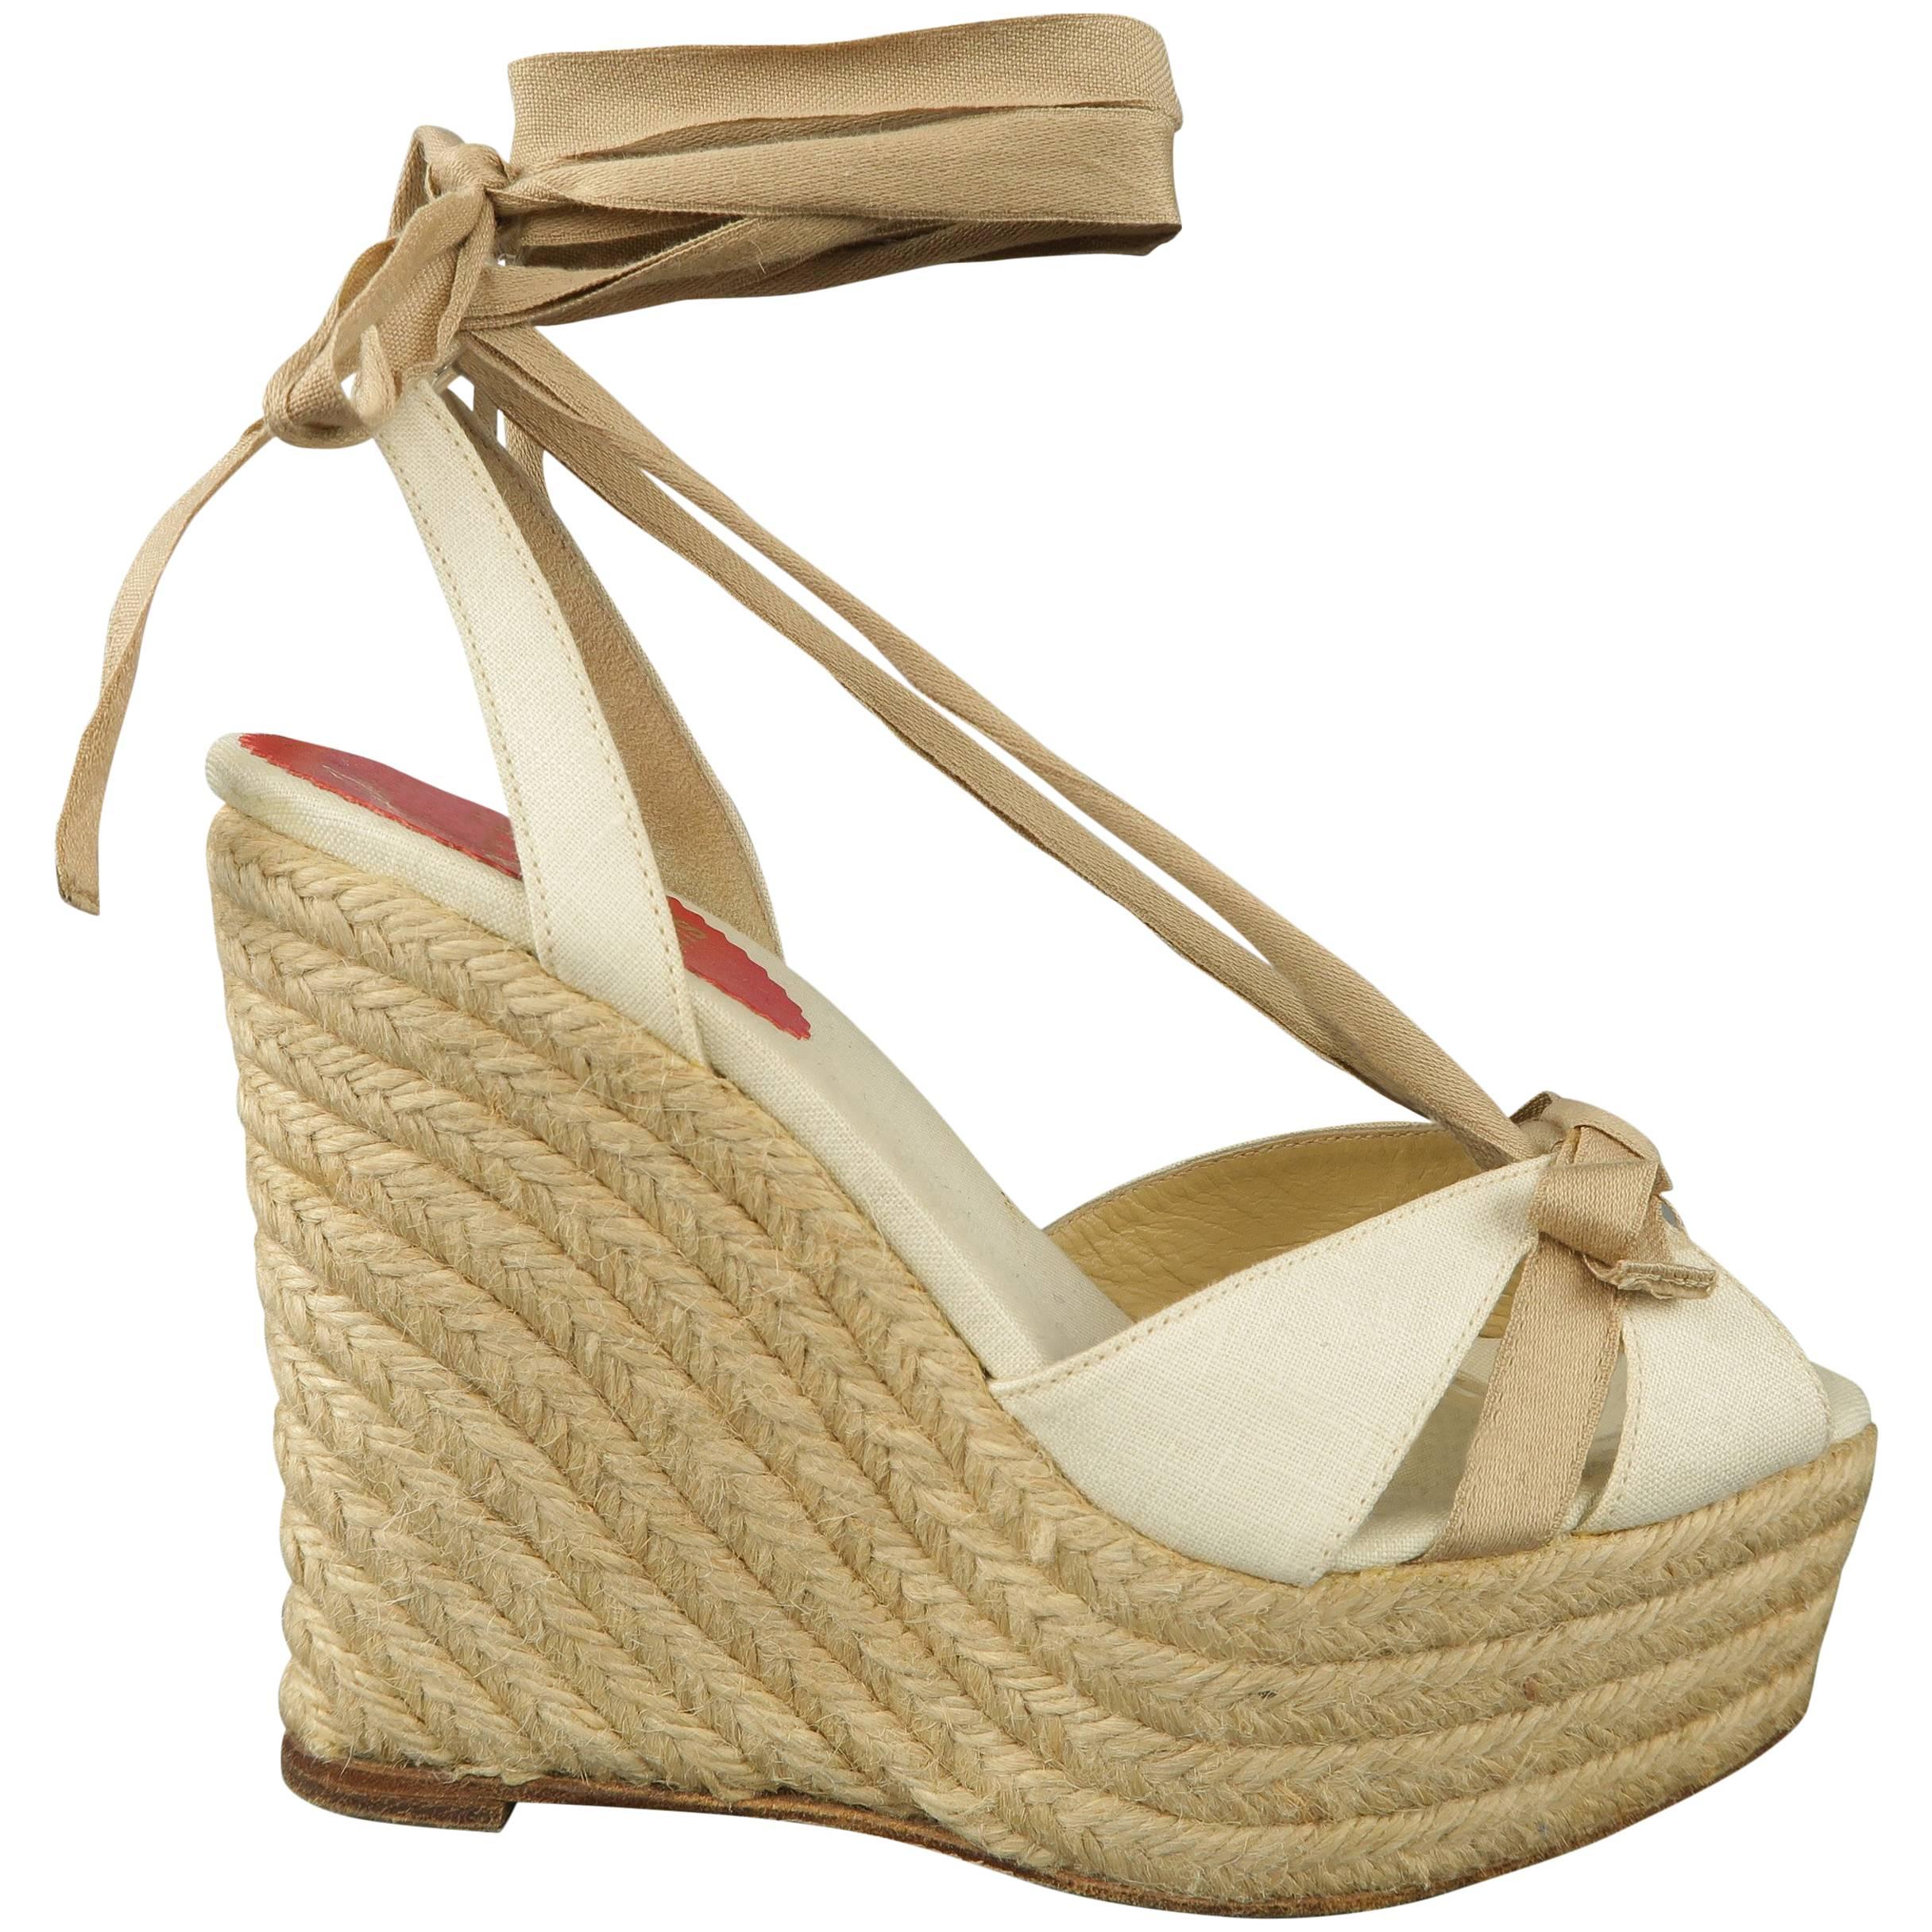 CHRISTIAN LOUBOUTIN 5.5 Cream & Beige Tied Ankle Strap Espadrille Wedge Sandals